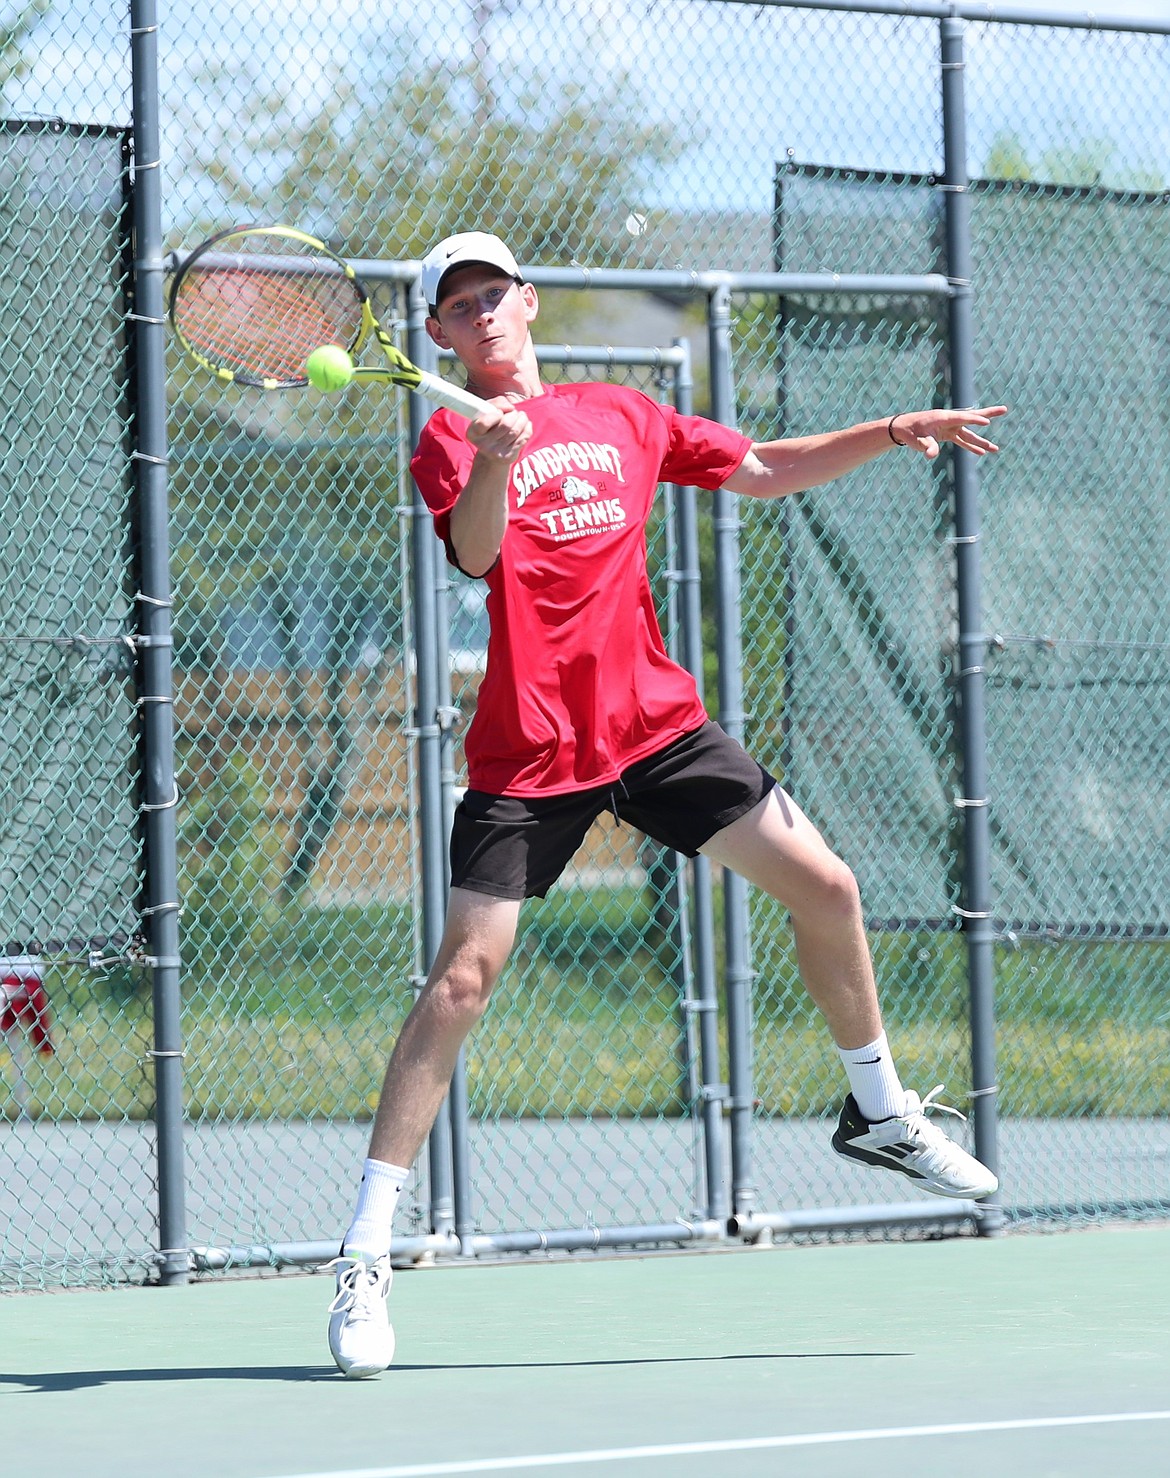 Josh Embree hits a return during the boys doubles regional championship match on Saturday at Travers Park.